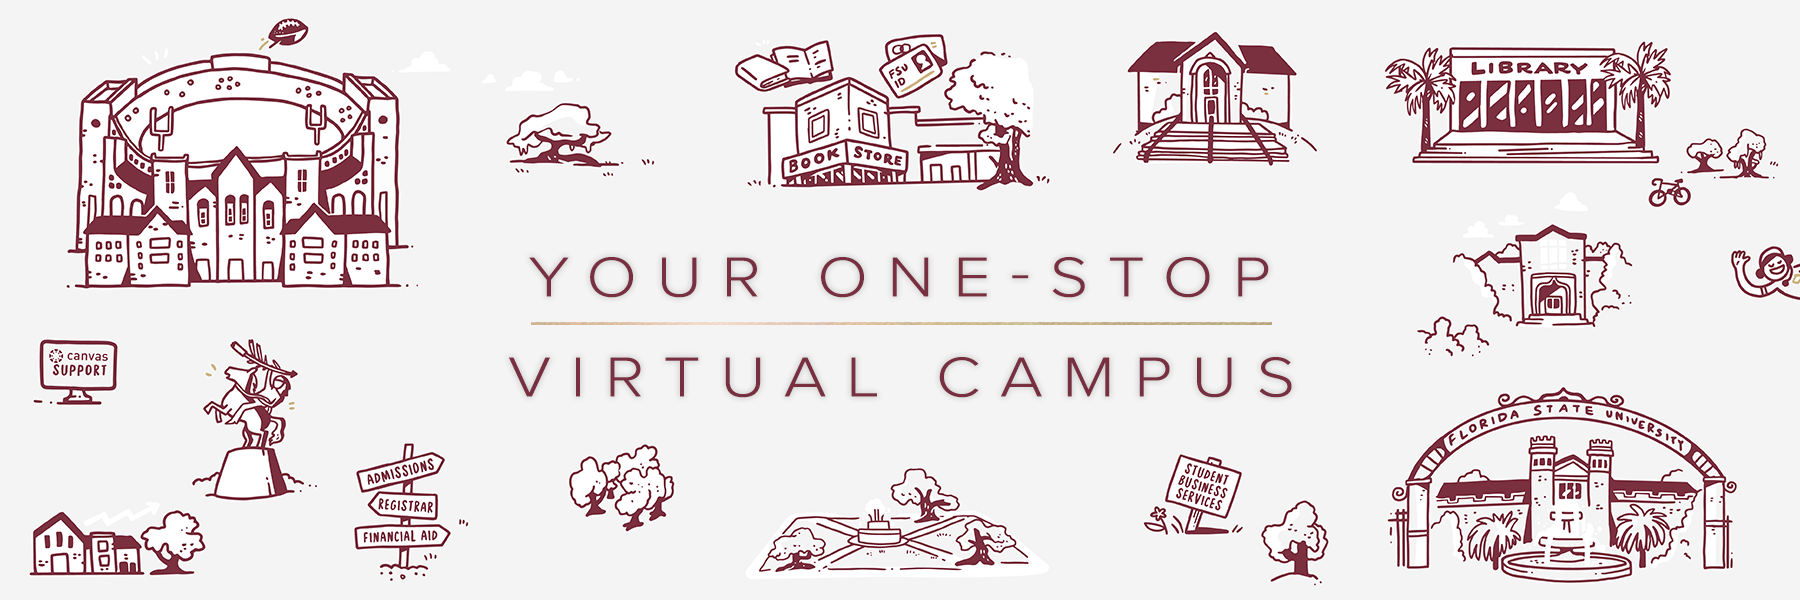 "Image with text: Your One-Stop Virtual Campus"